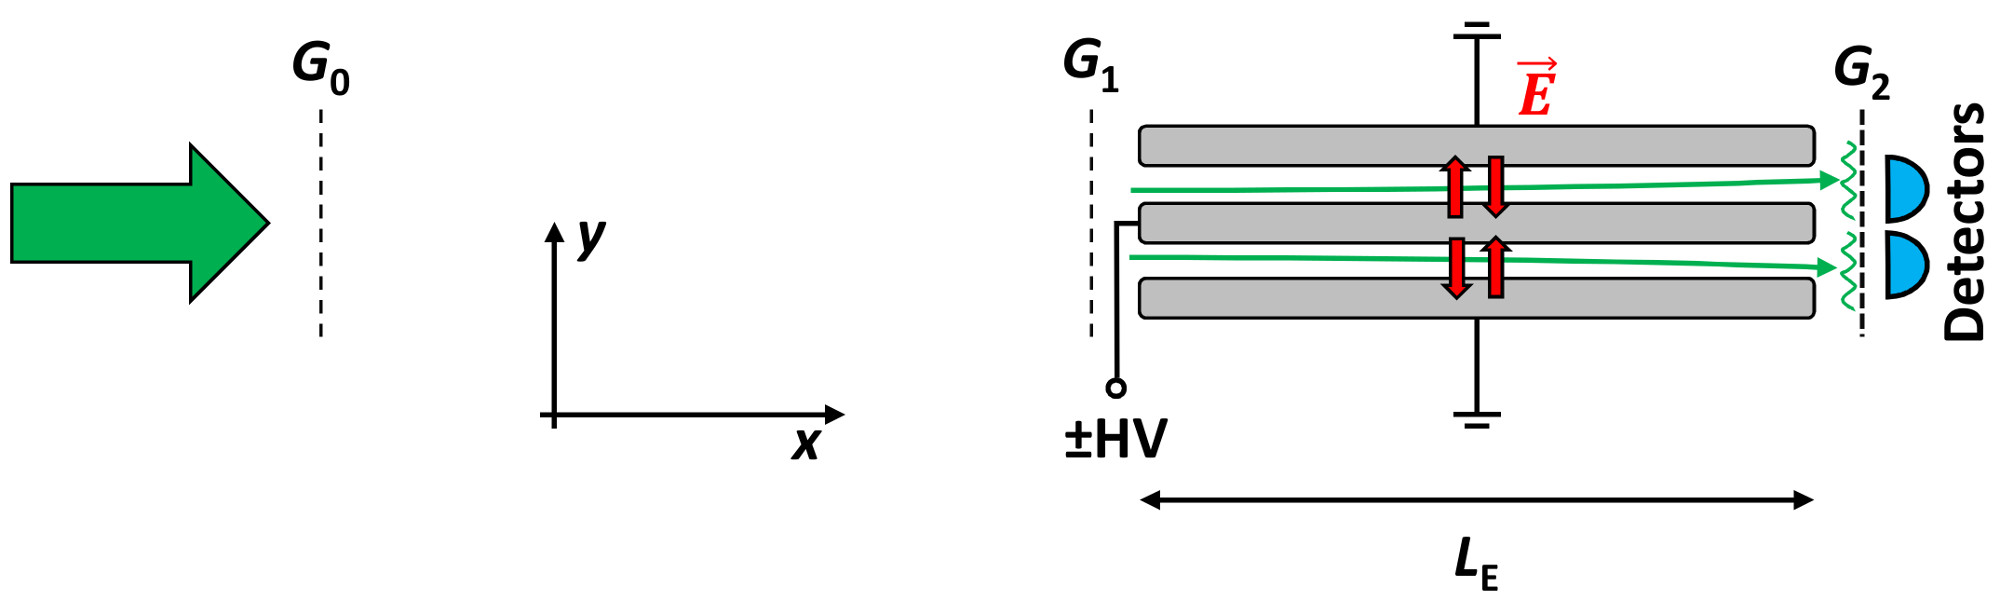 Scheme of the Talbot-Lau interferometer setup to measure the neutron electric charge.